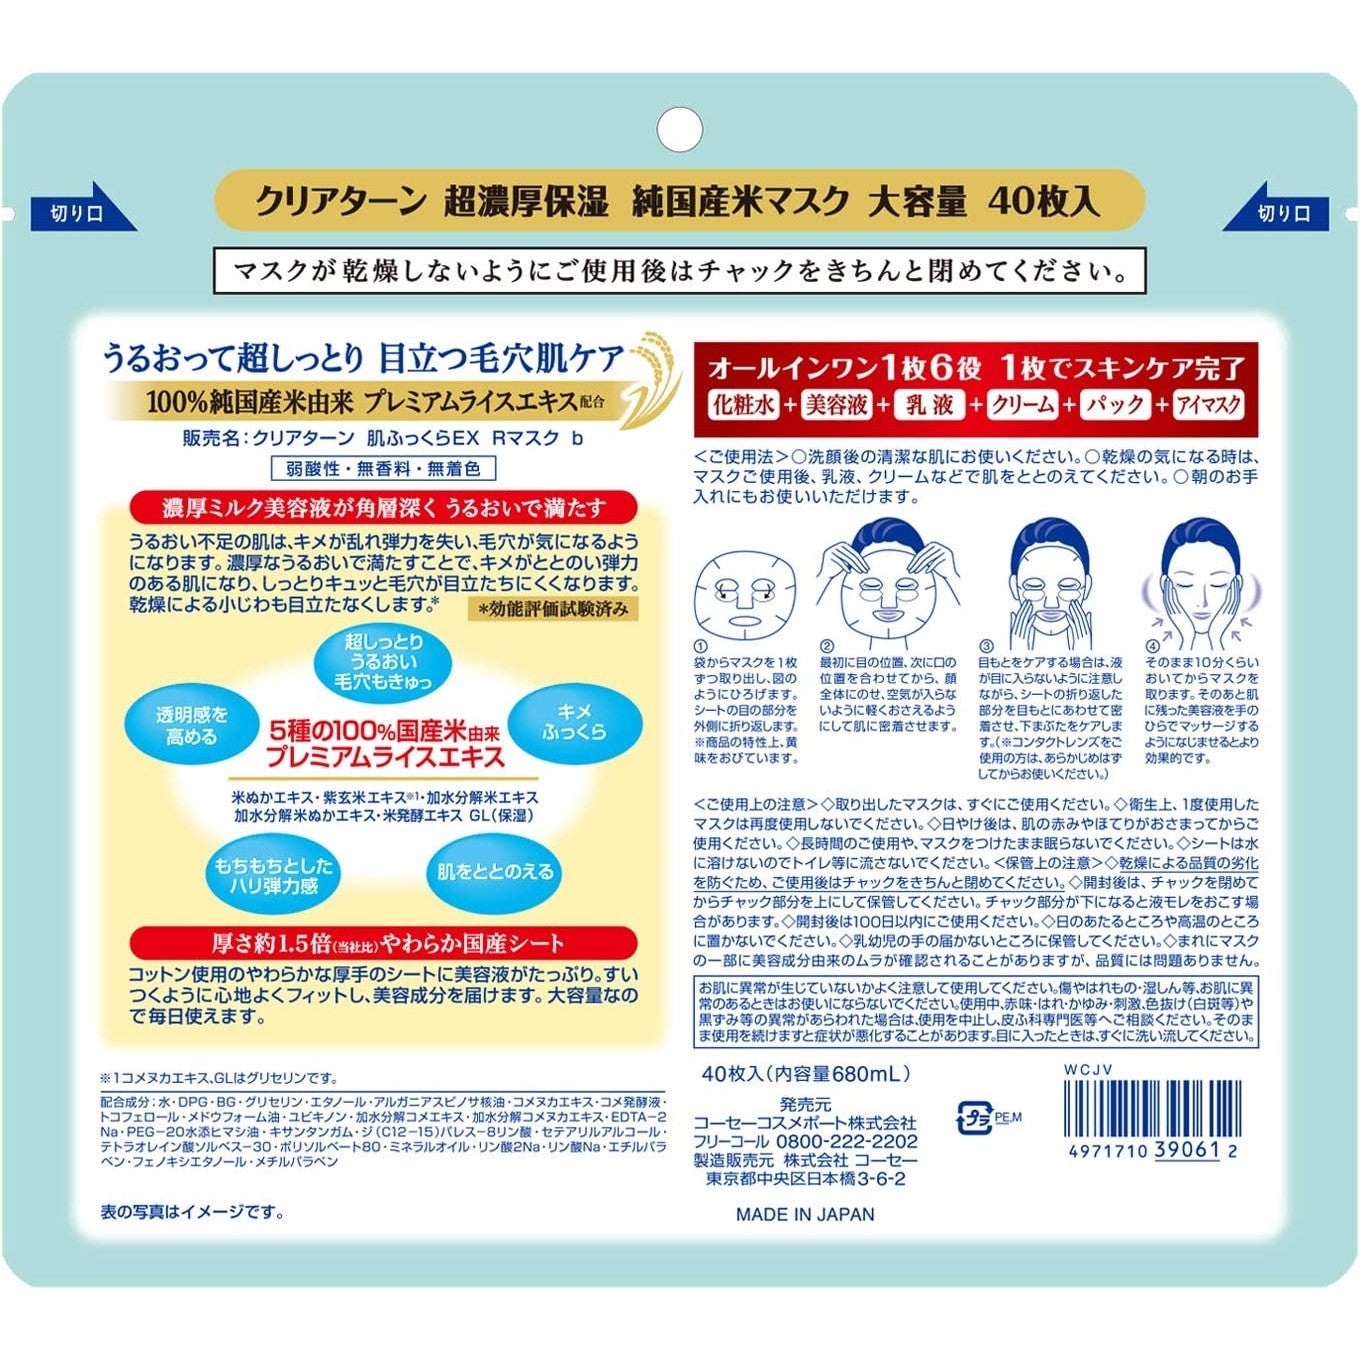 KOSE Clear Turn Pure Japanese Rice Face Mask 40pcs (Made in Japan)